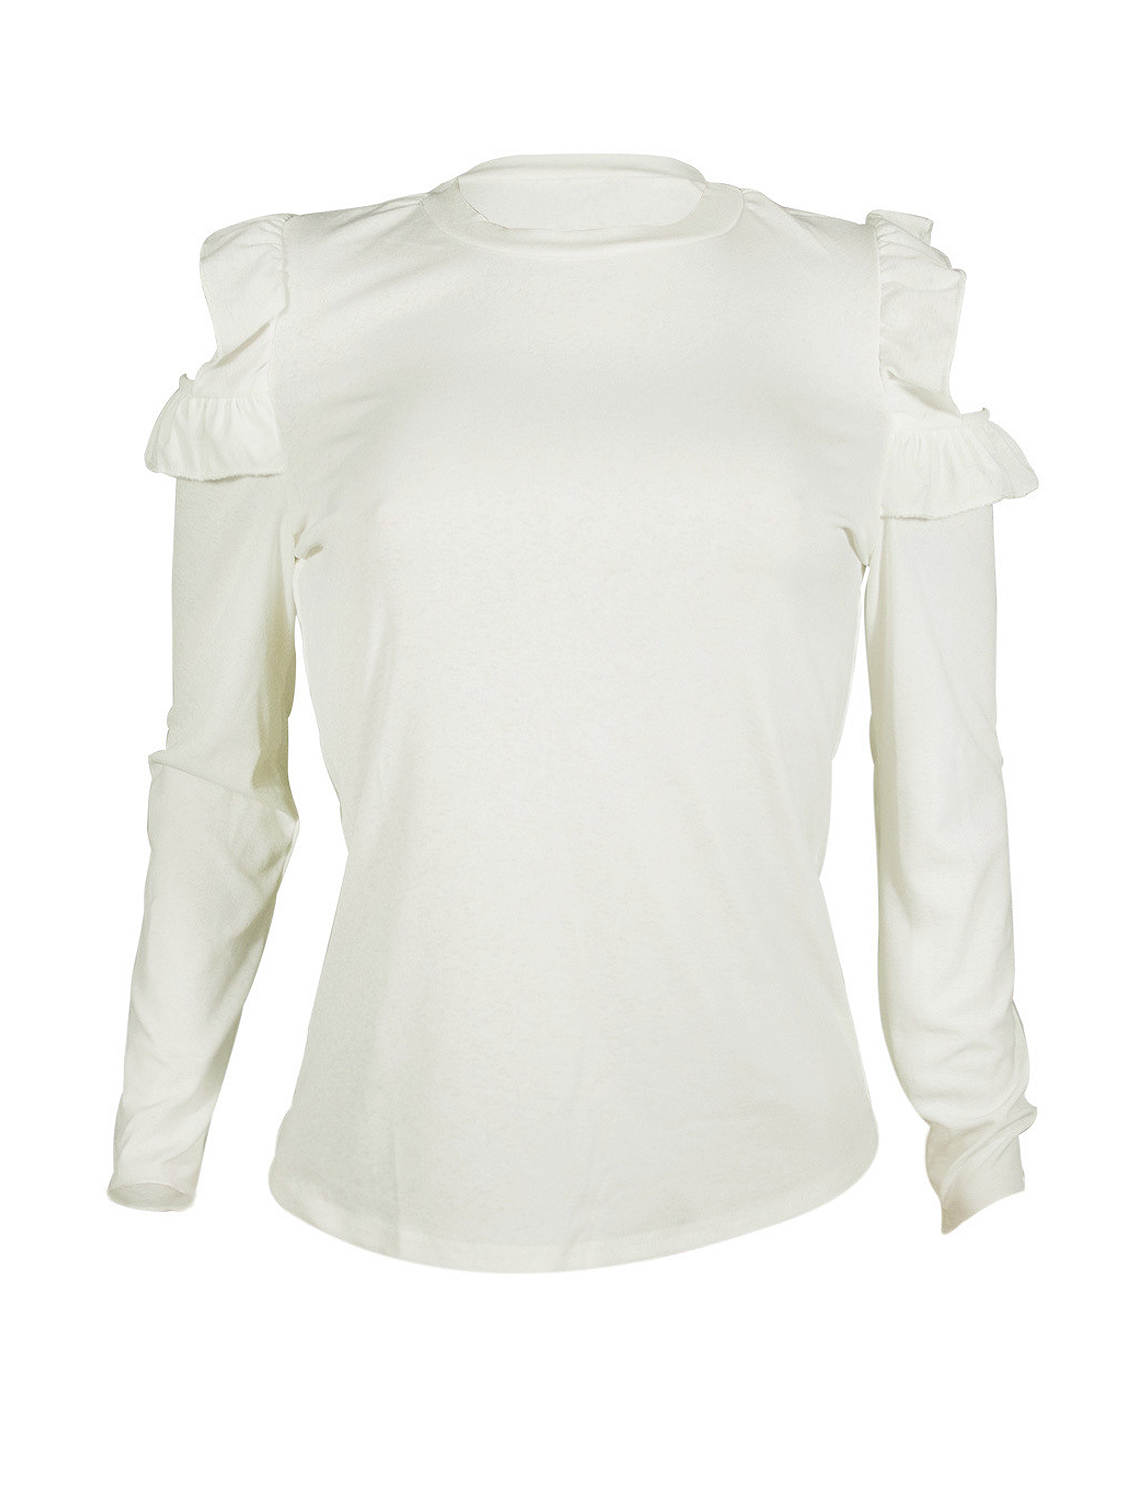 White Ruffle Cold Shoulder Long Sleeve Top | Choies